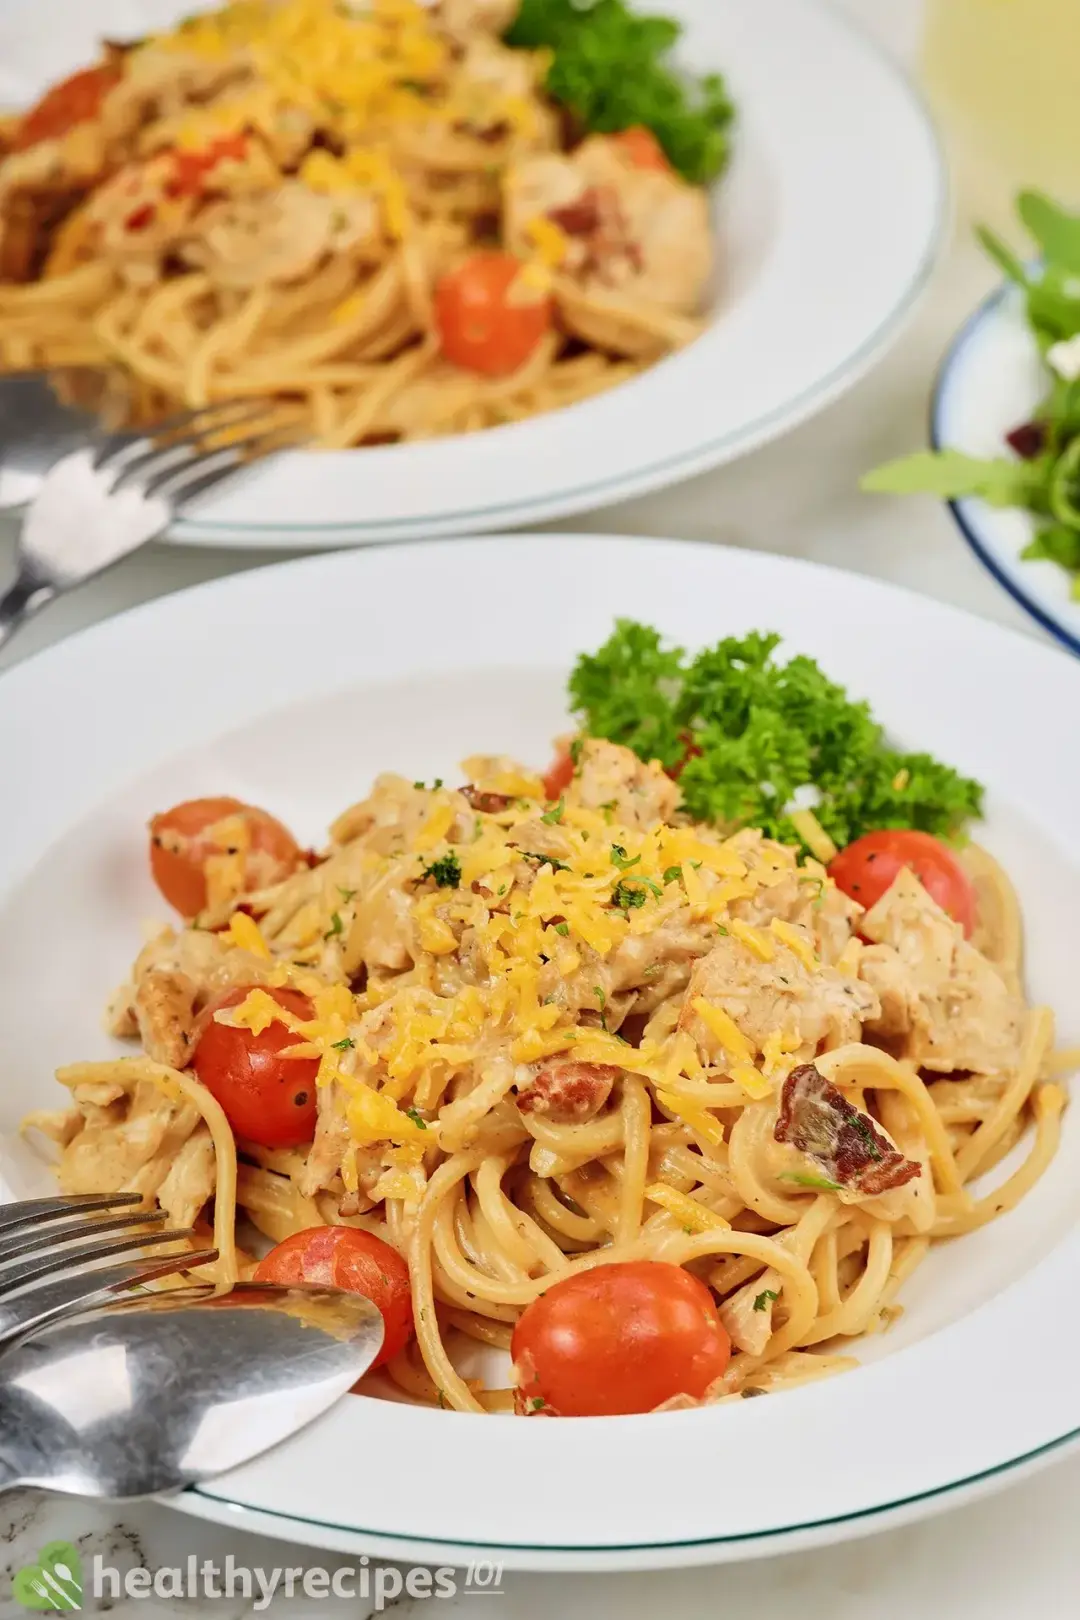 What to Serve with Chicken Spaghetti